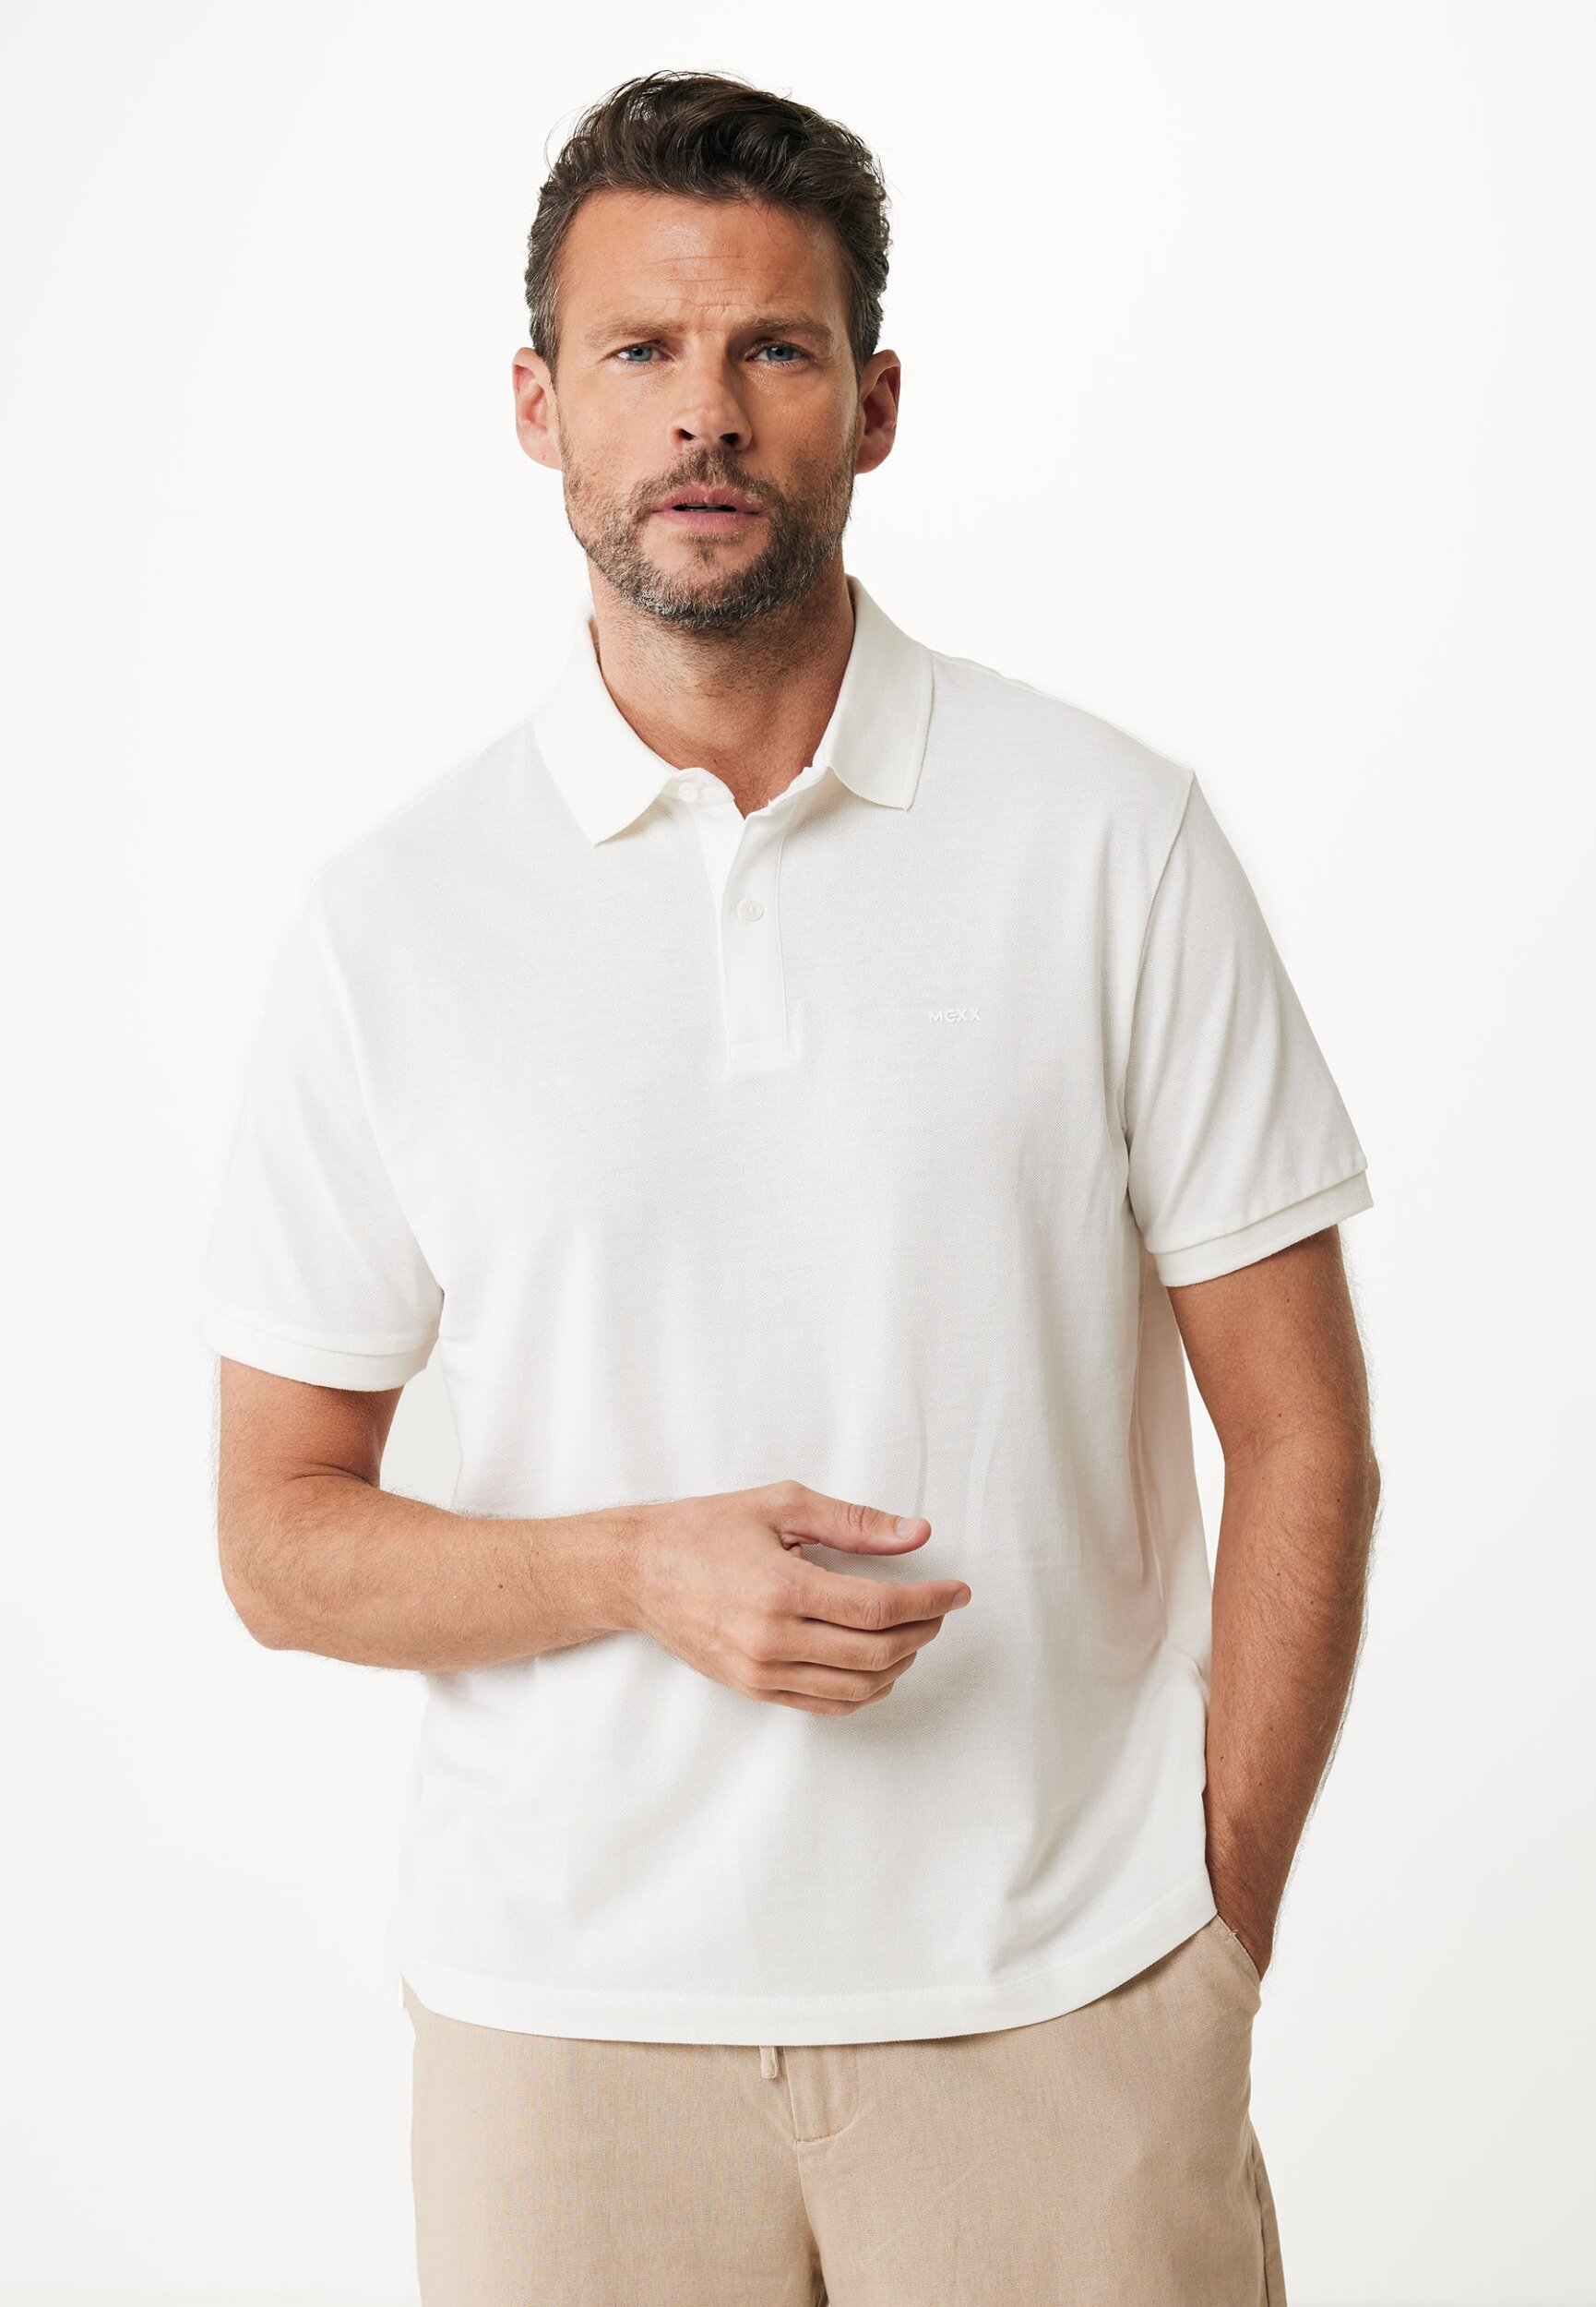 PETER Basic Pique Polo Regular Fit Mannen - Off White - Maat M